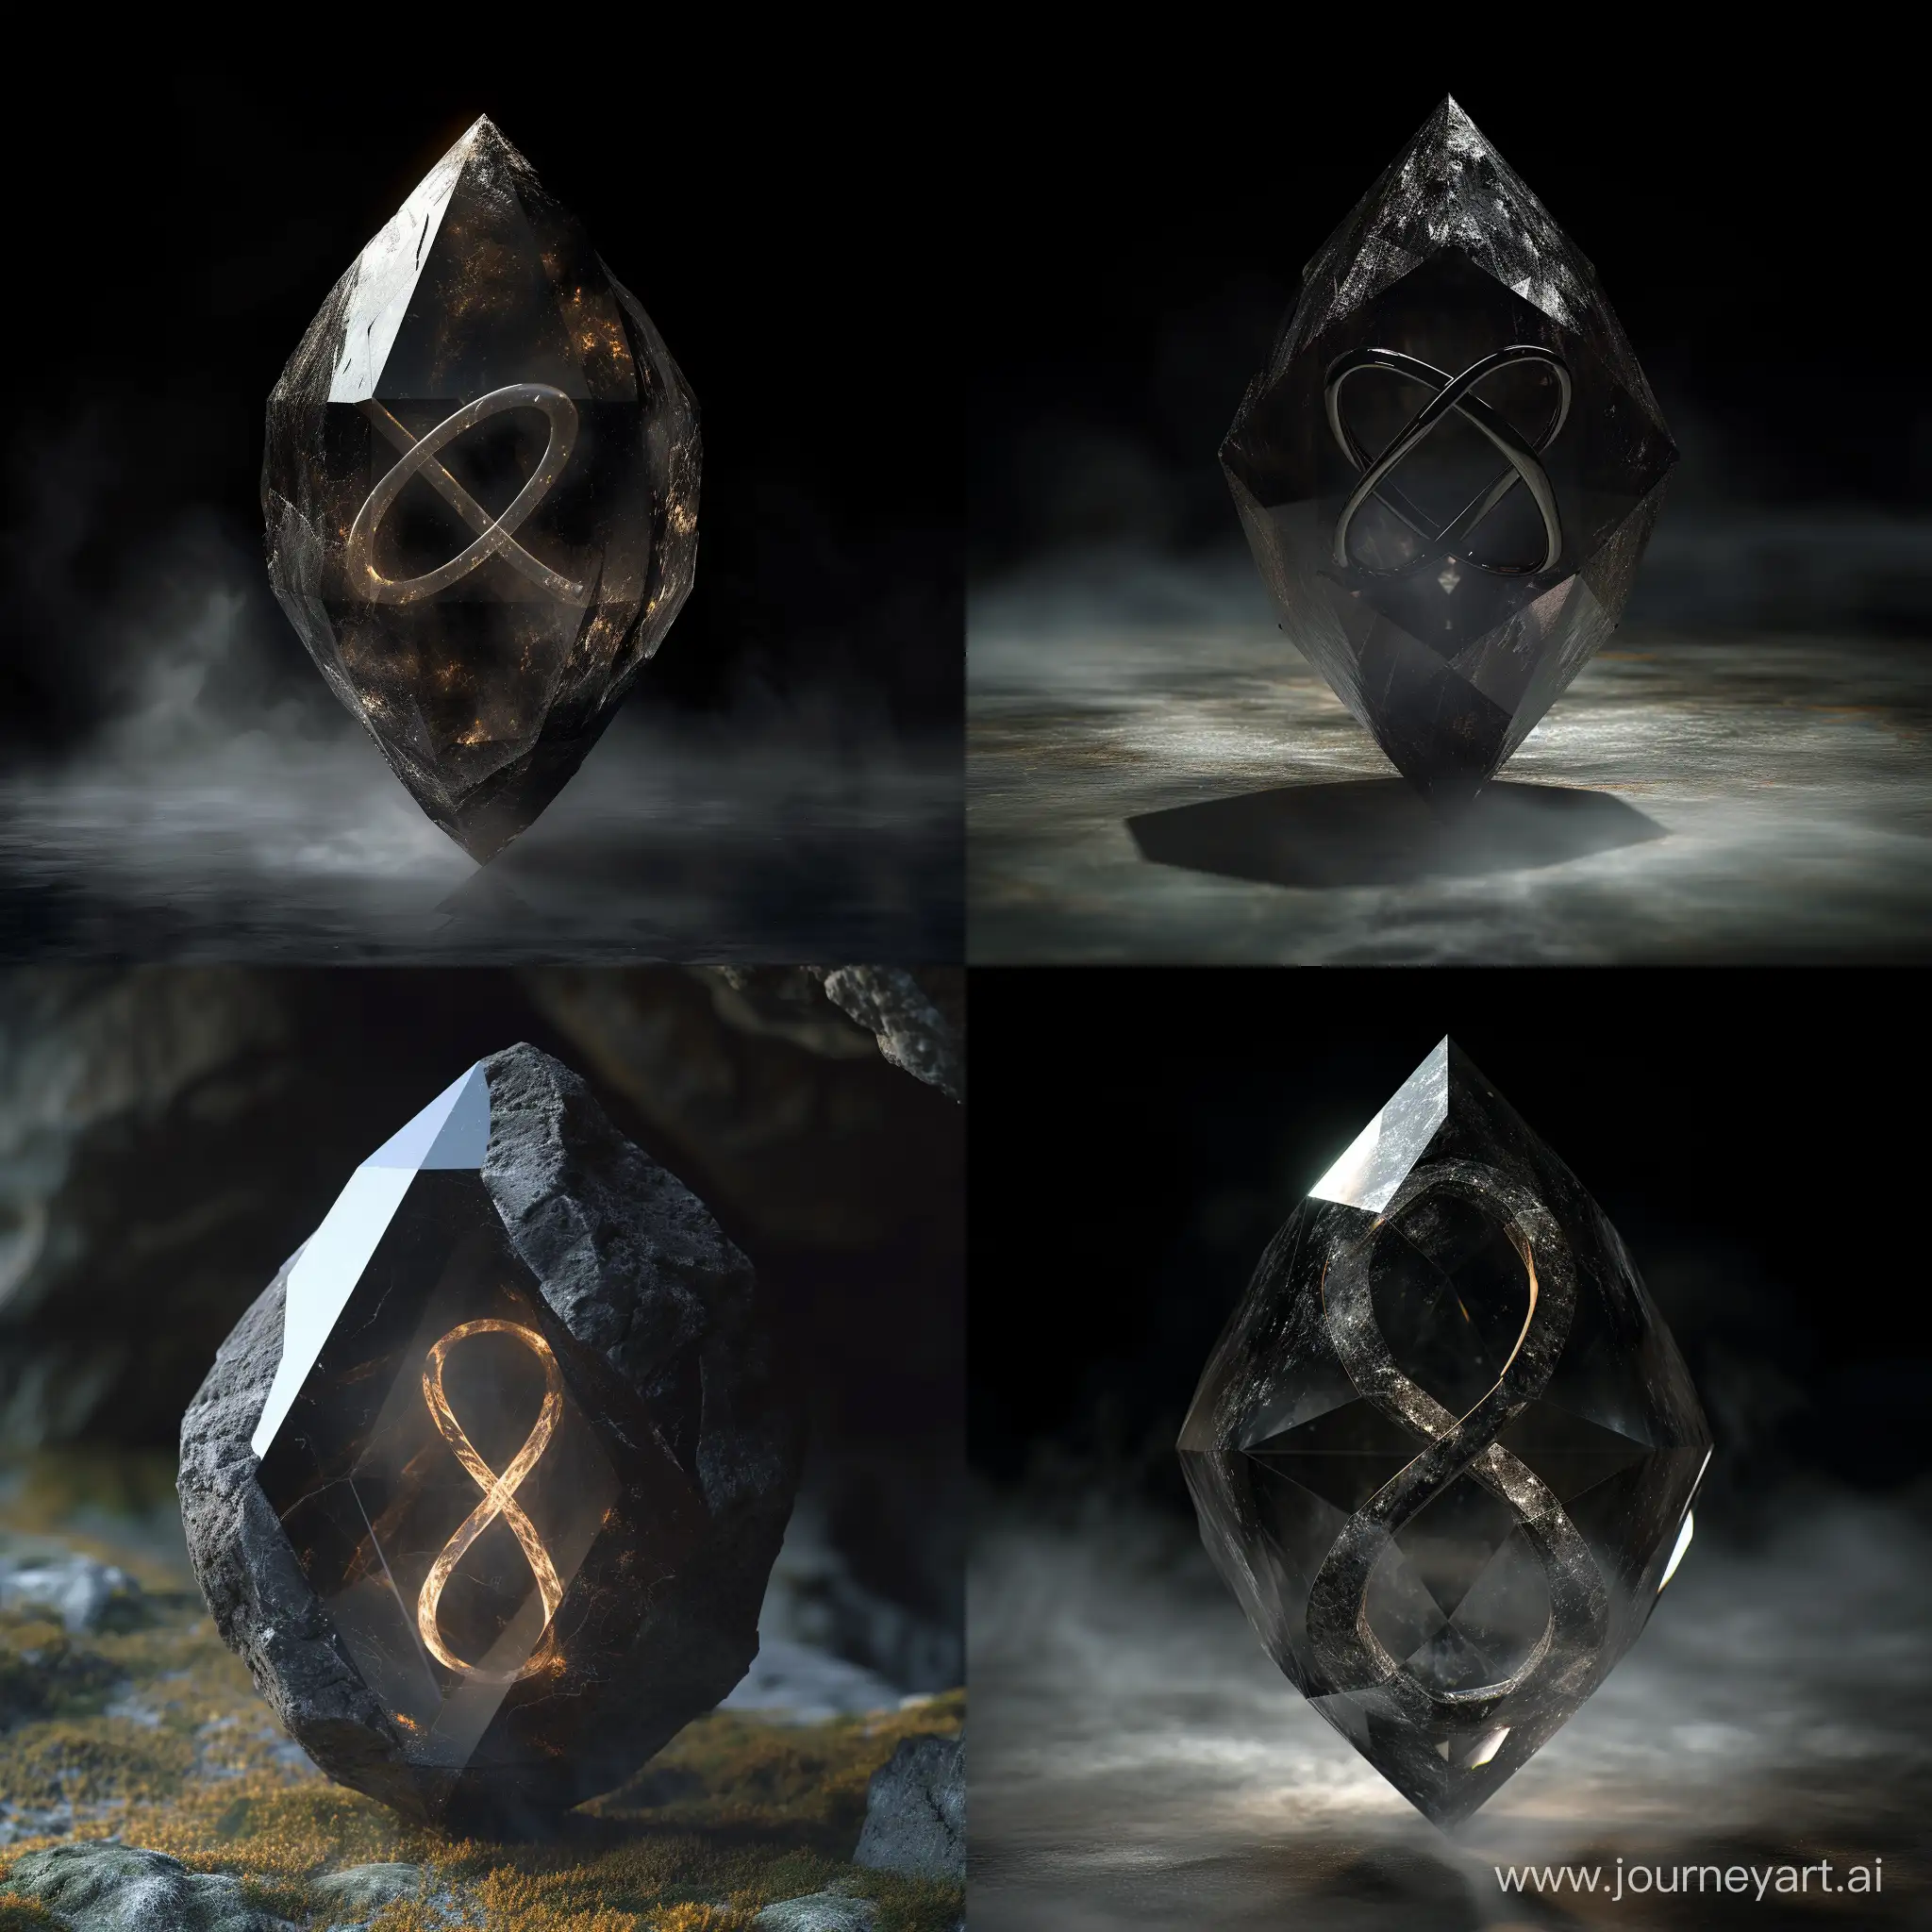 translucent black diamond-shaped crystal inside with a light haze in the shape of an infinity sign called essence, cave, lotr, realistic, fantasy, 4k, hd